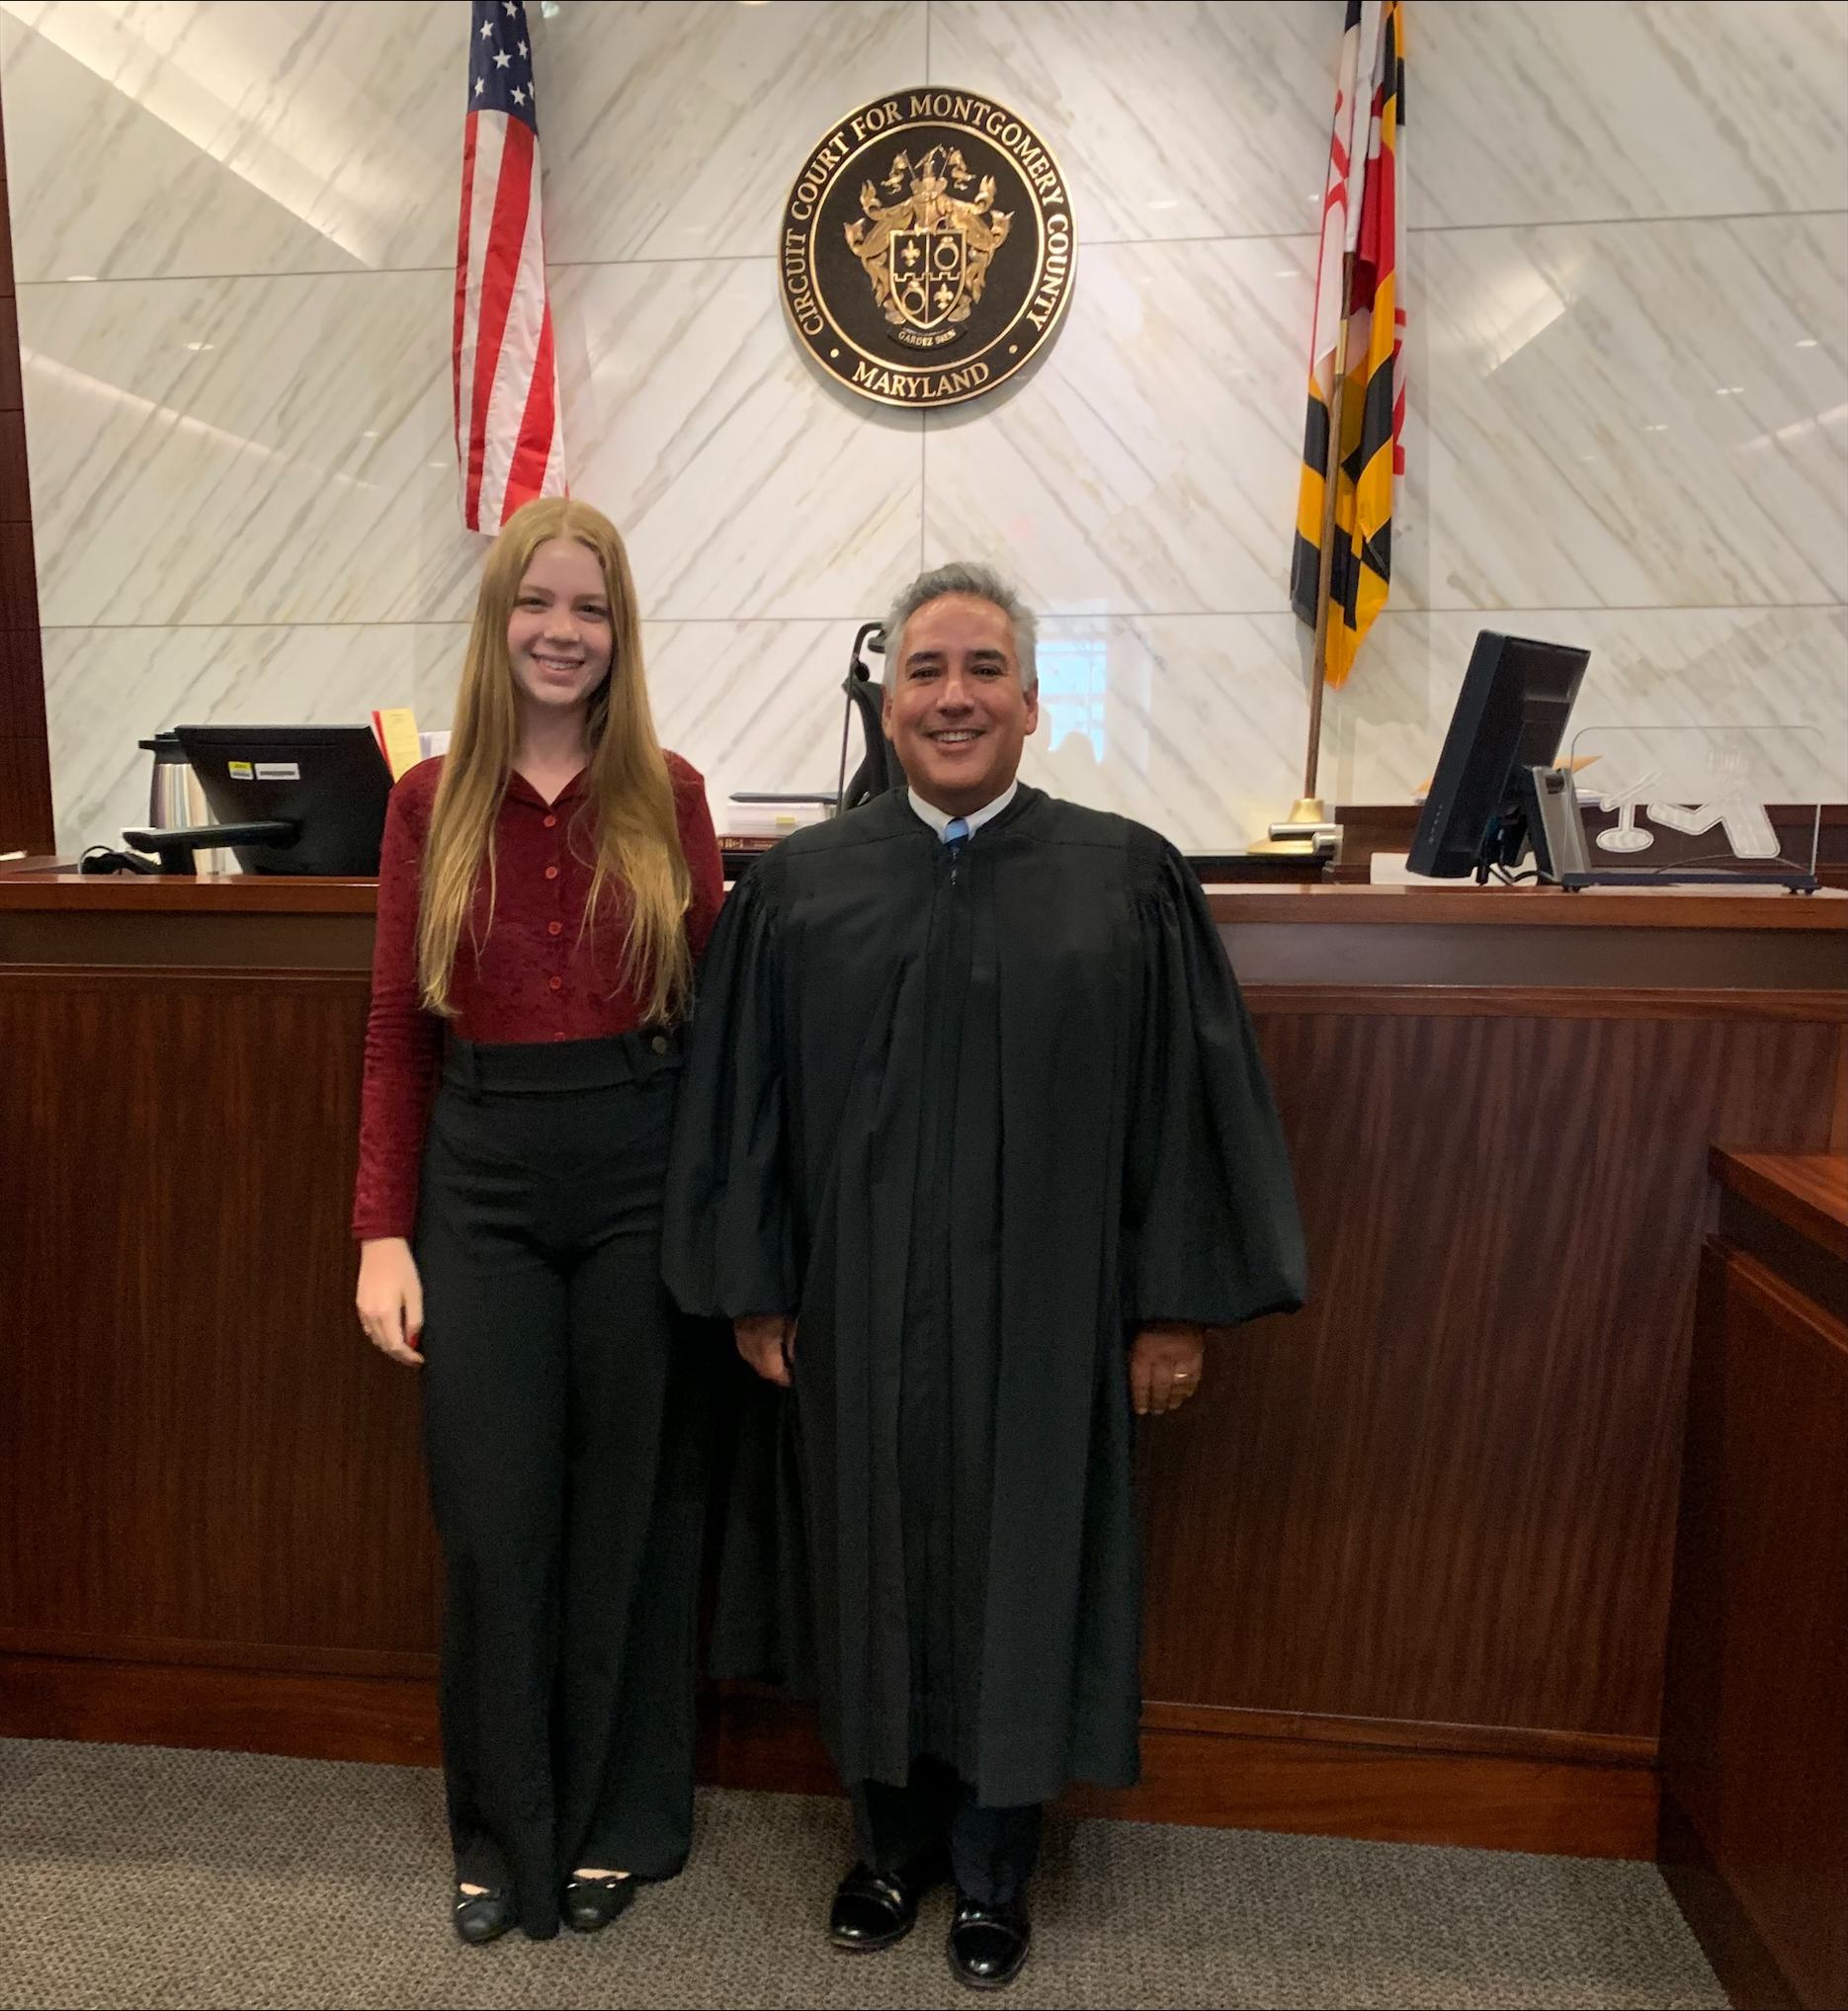 Zen Gordon ’26 and the Hon. Carlos F. Acosta ’85, M.A. ’91 posing for a picture in Acosta's courtroom.